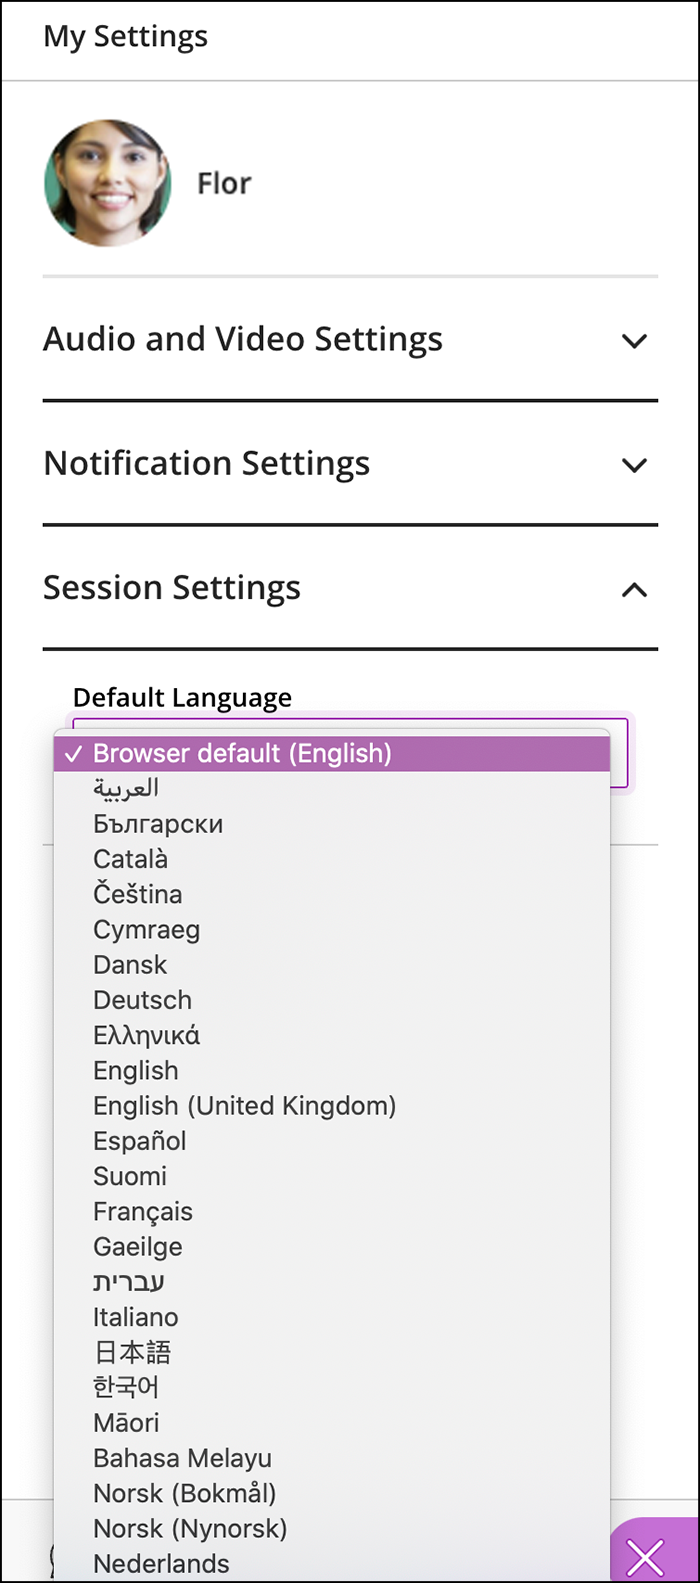 In My Settings under Sessions Settings is a Default Language menu